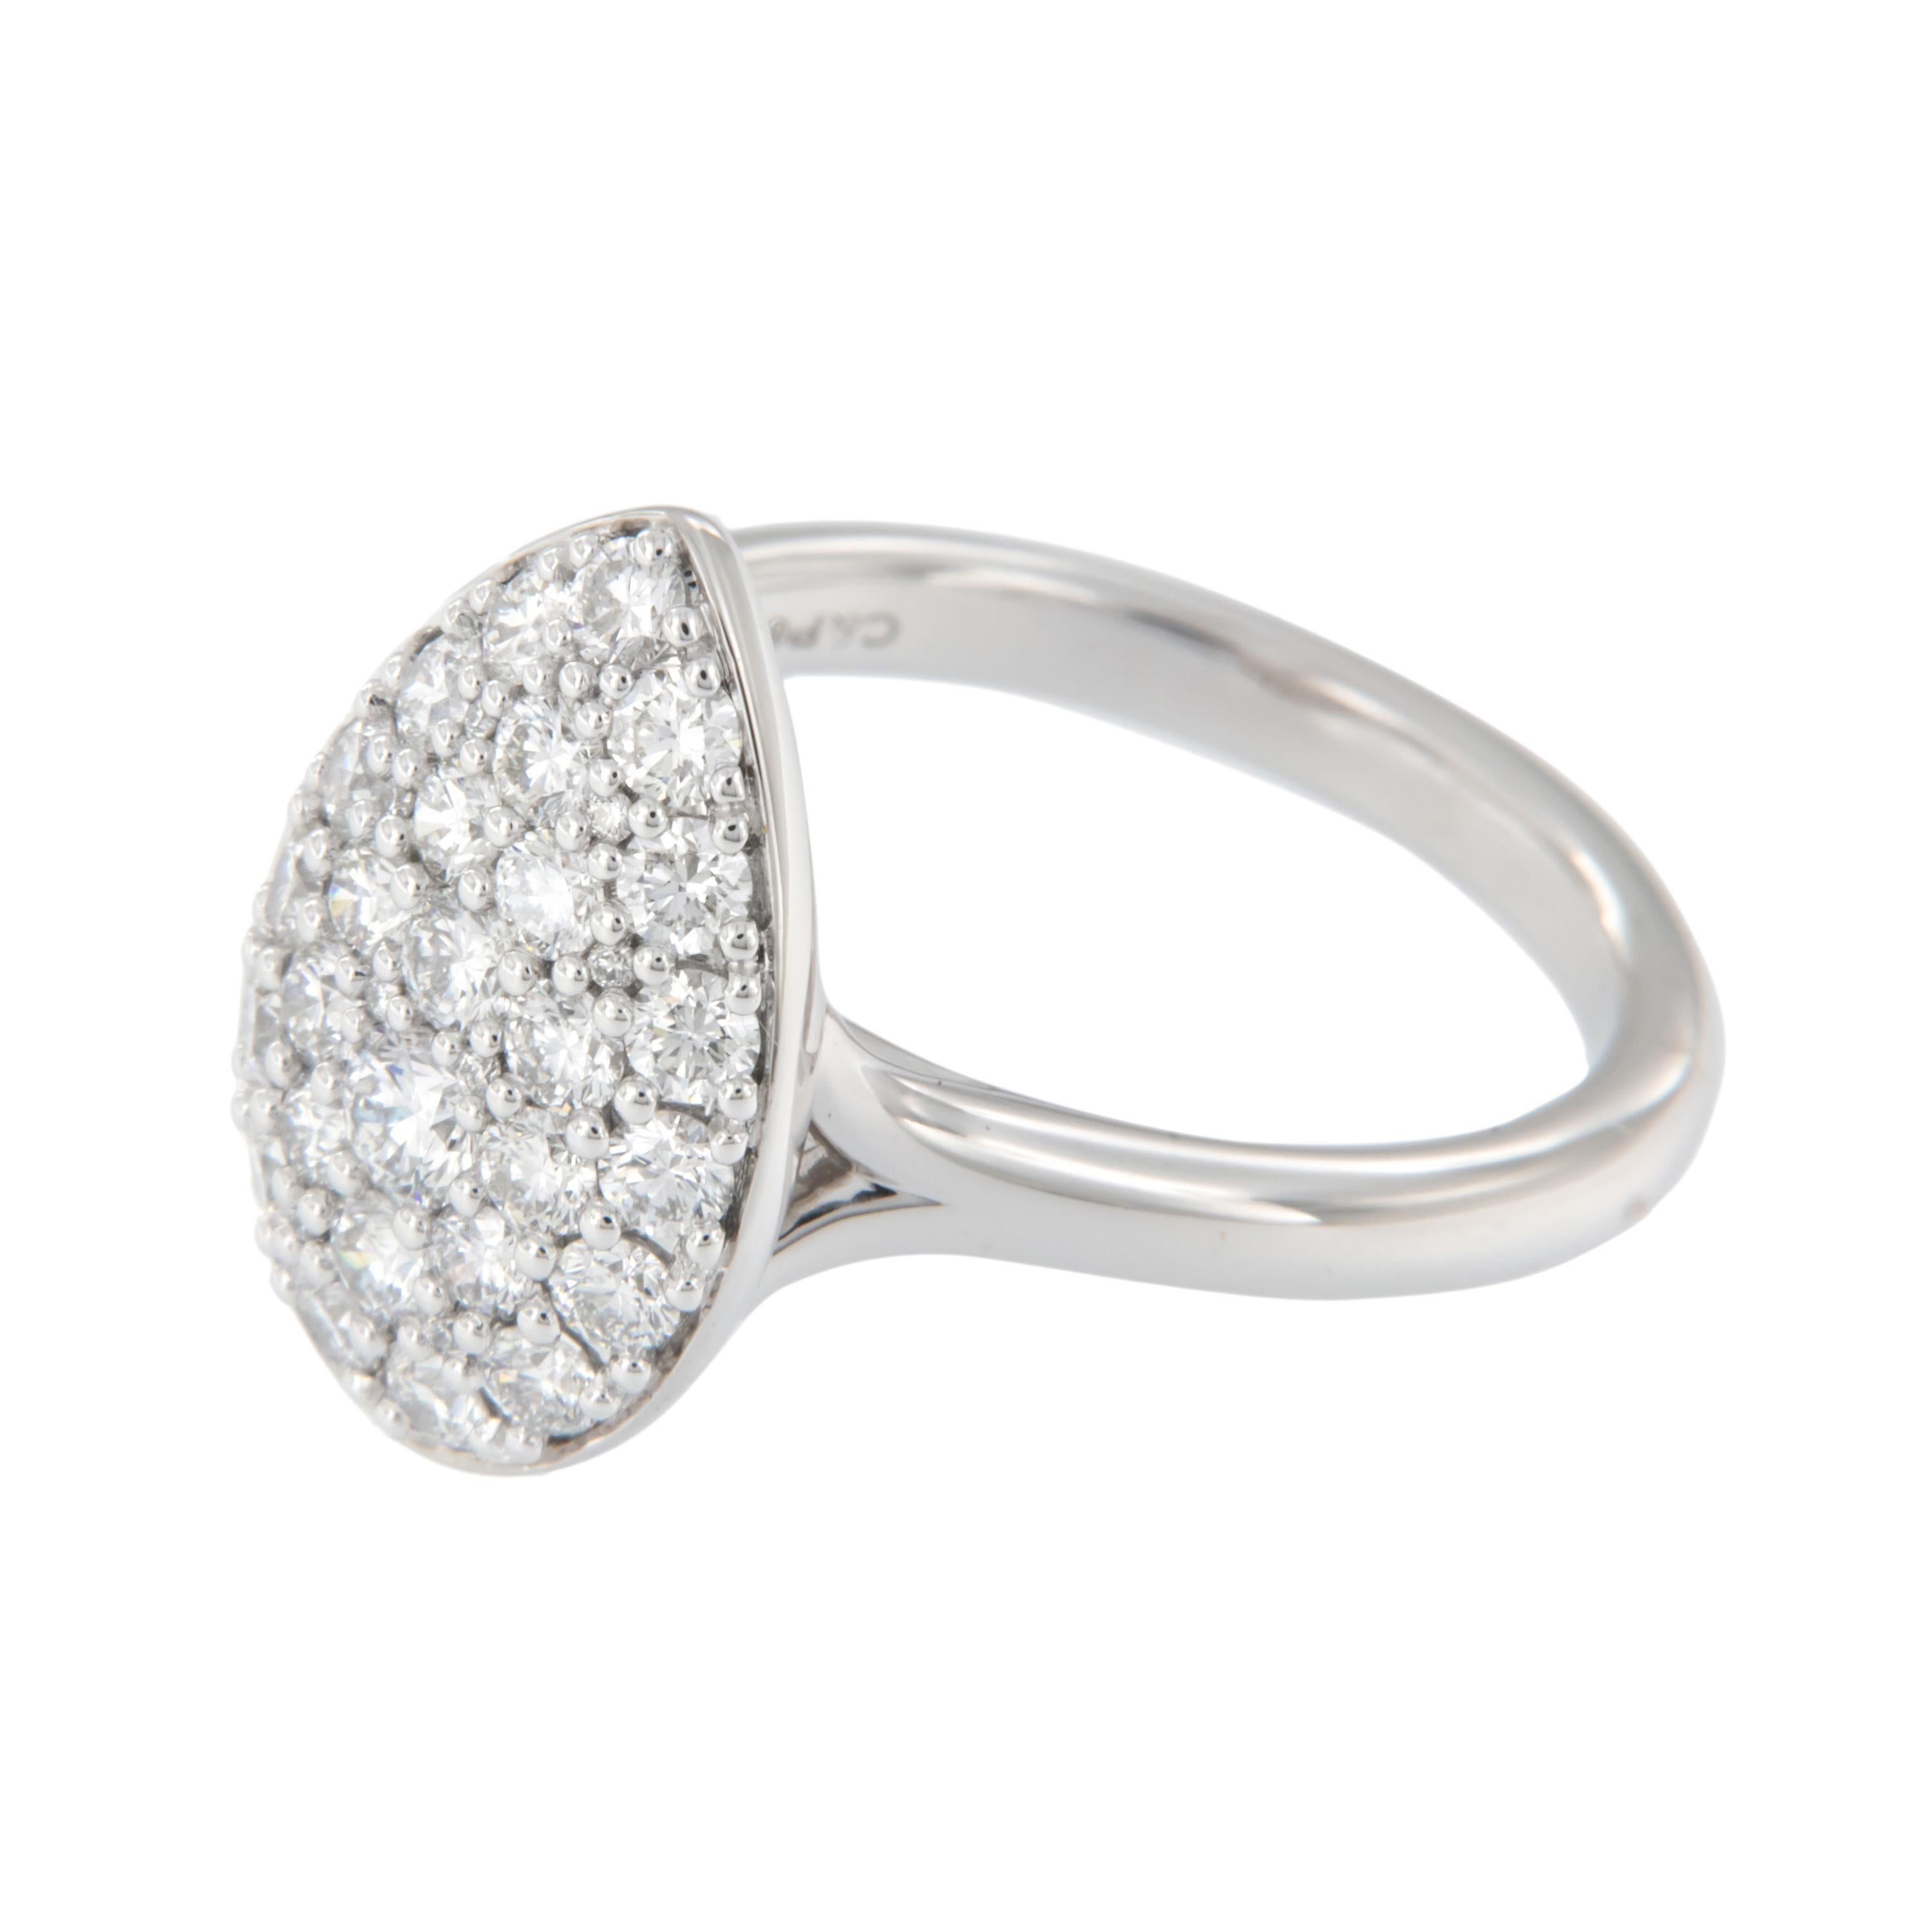 Eye catching pave' set diamond ring with 35 diamonds = 1.32 Cttw! This ring has the look and the size at an amazing price. Made from fine 18 karat white gold and set with VS, F-G diamonds to glimmer from every angle. This ring is a size 6.75 but can